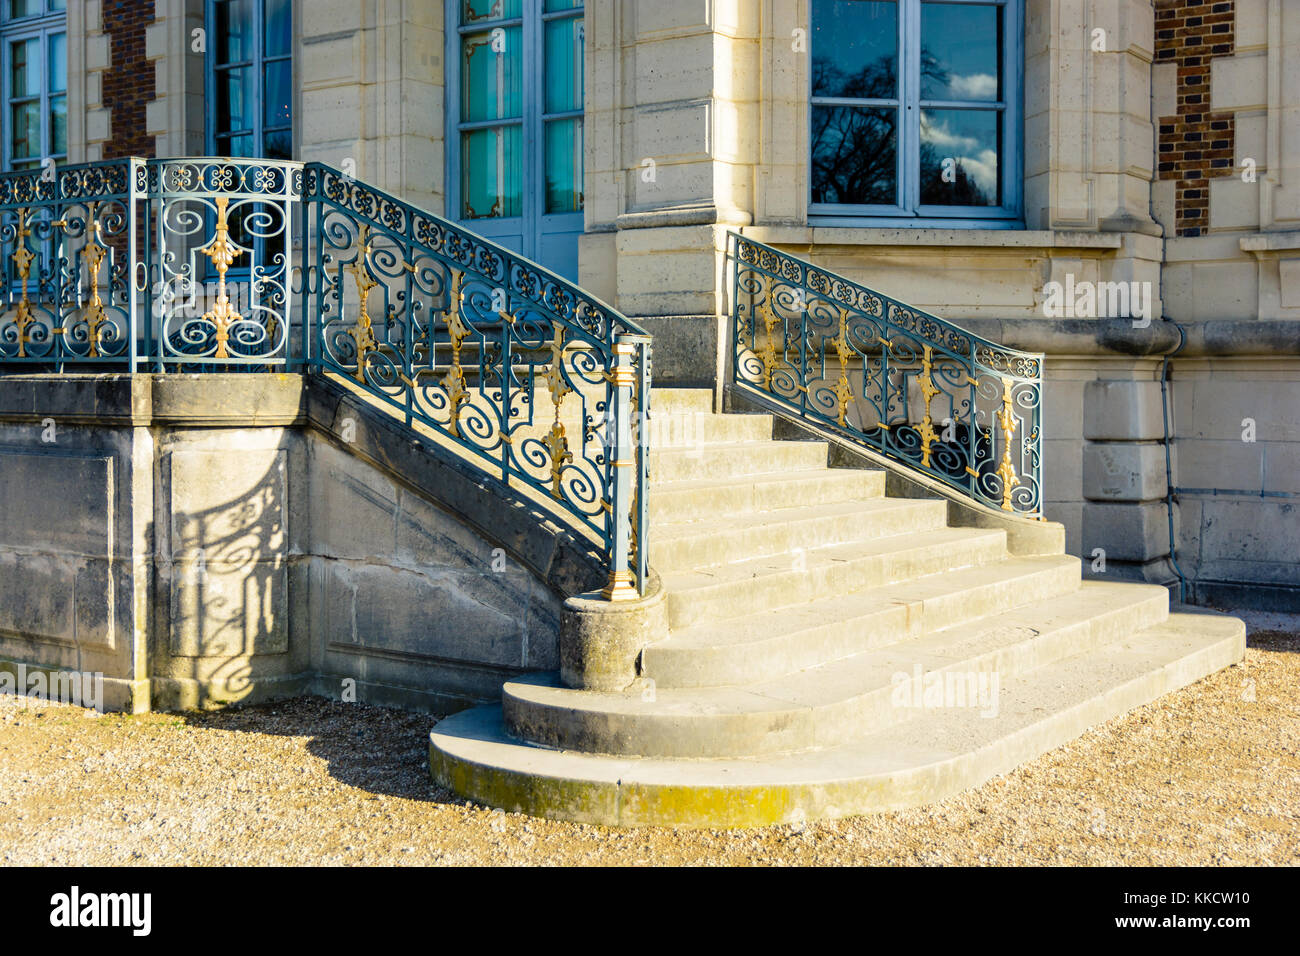 Sceaux, France - November 26, 2017: The garden side staircase of the Sceaux castle  with its wrought iron railing, by a sunny morning. Stock Photo